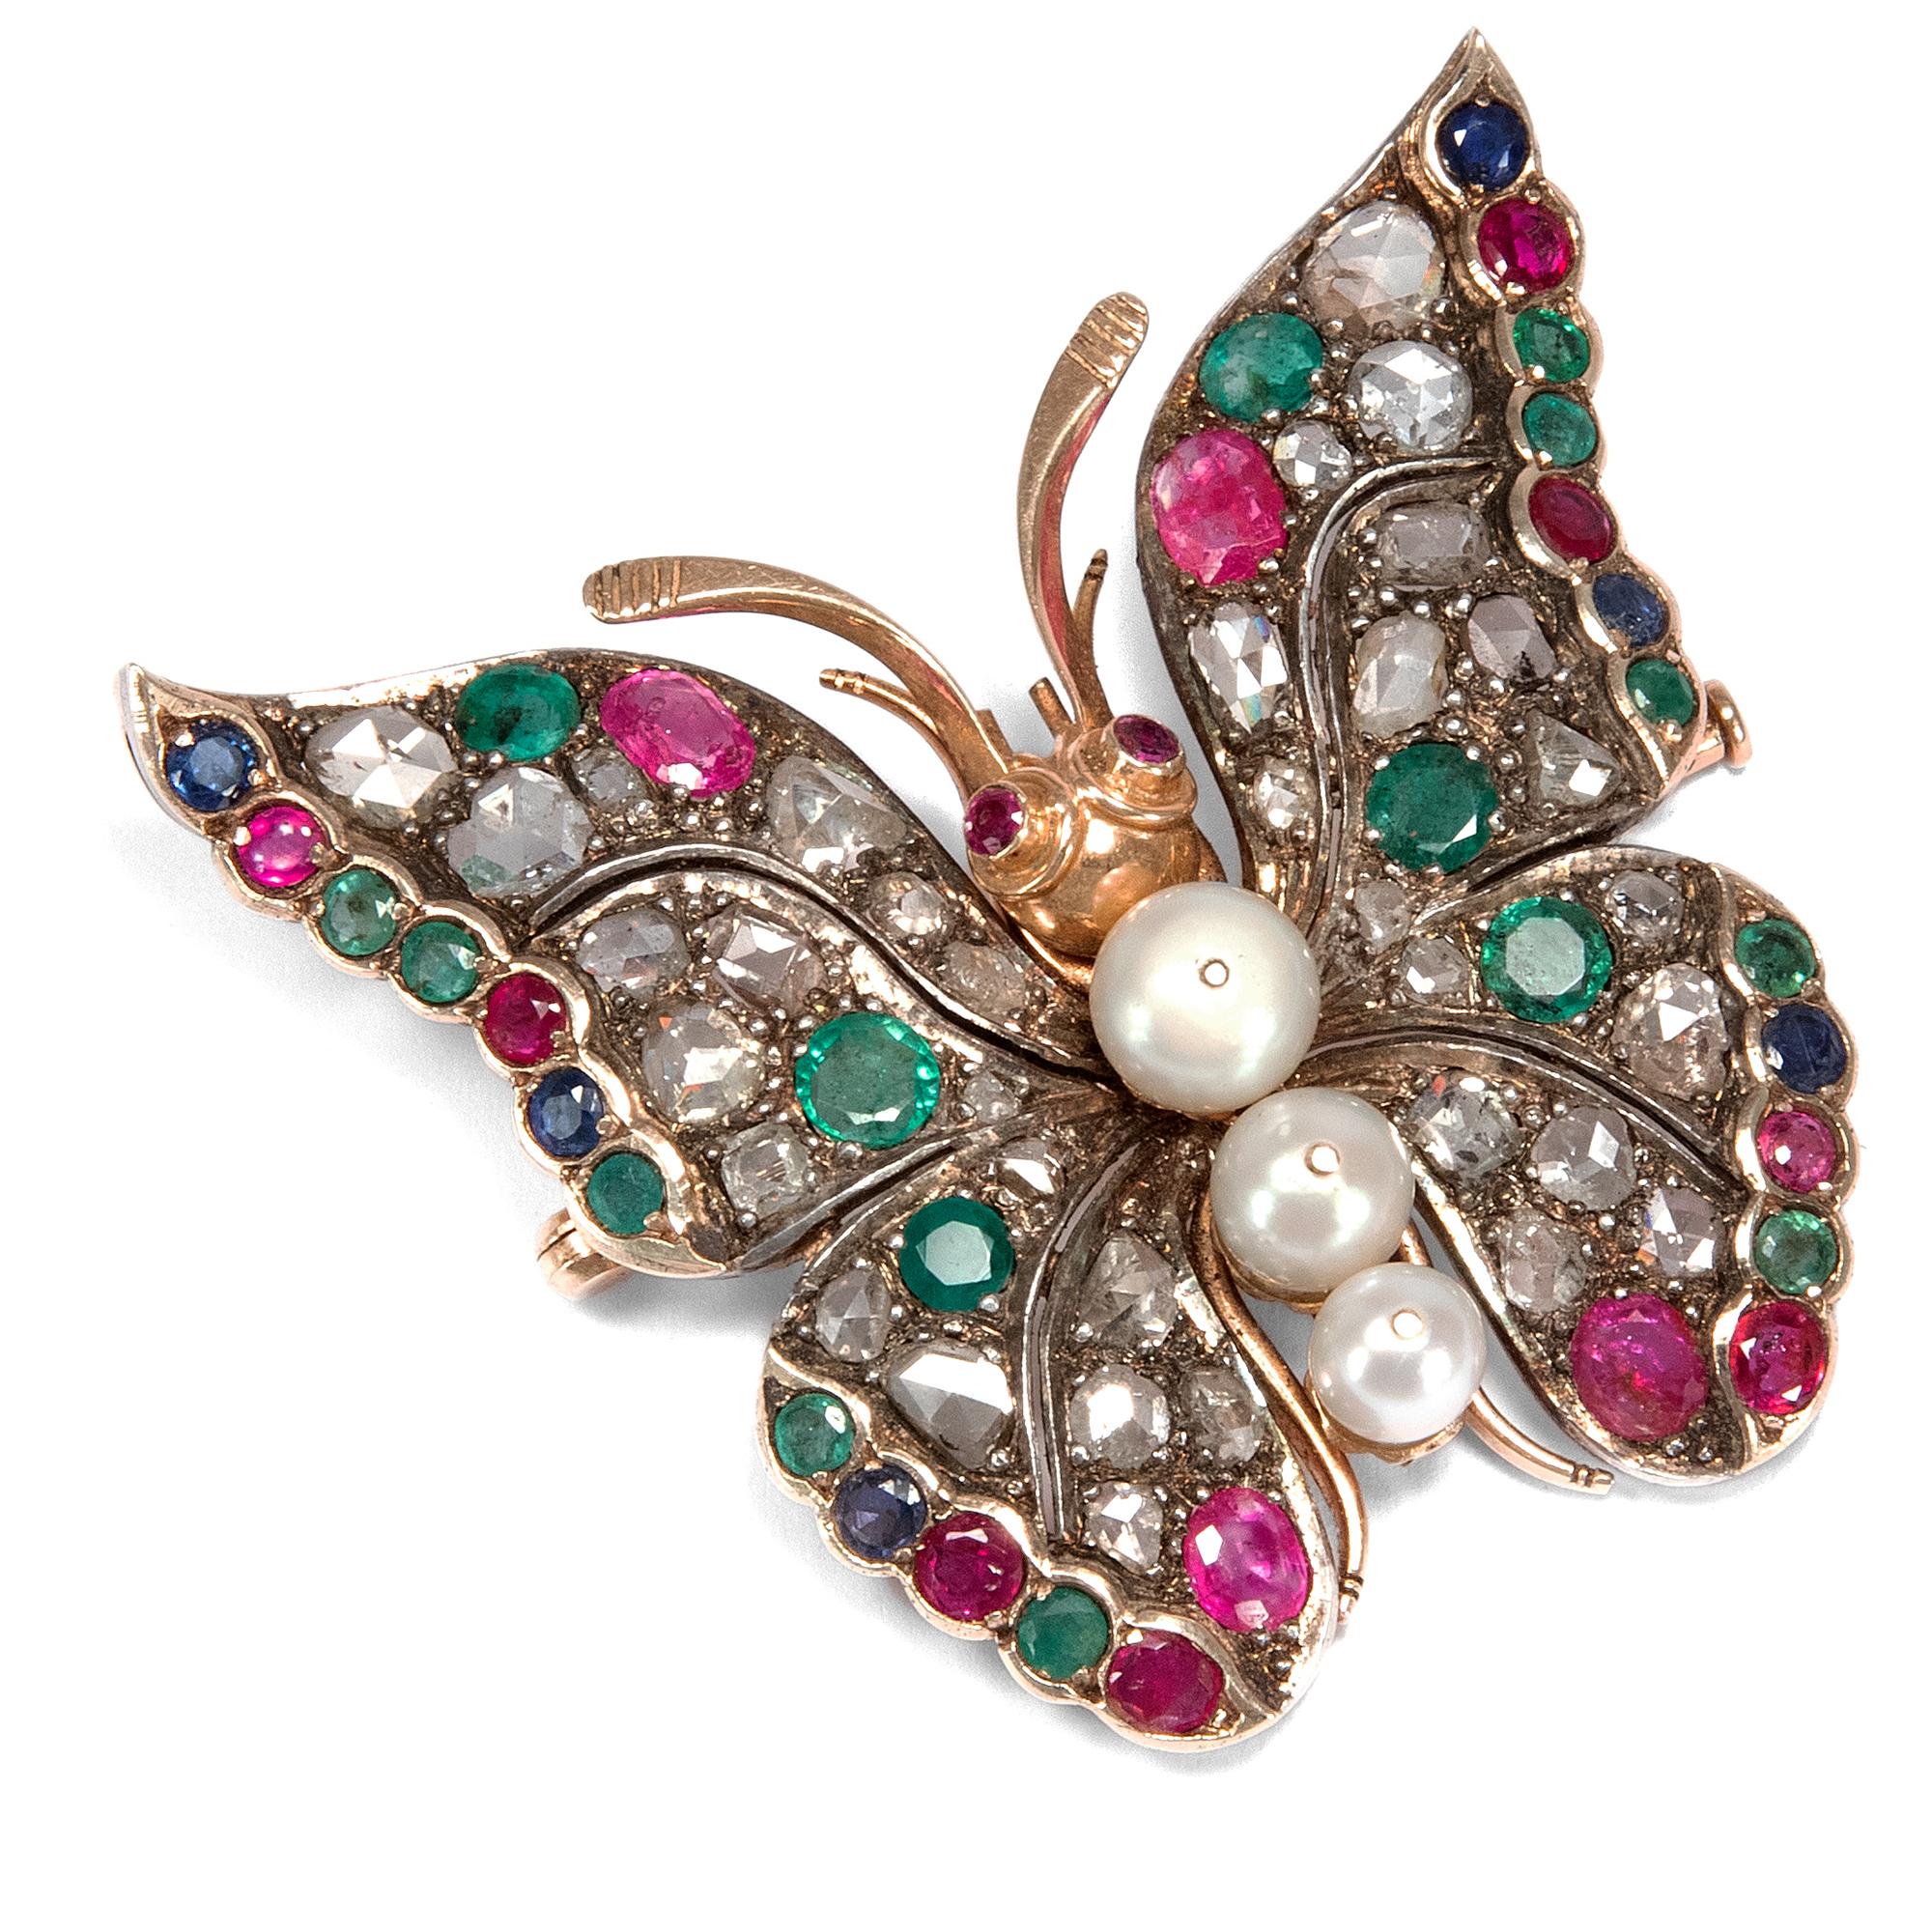 Conversation pieces in the form of insect brooches were a popular trend from the 1890s onwards that has since often been revisited. Especially butterflies were well-loved, since their colourful wings lent themselves beautifully to a lavish use of